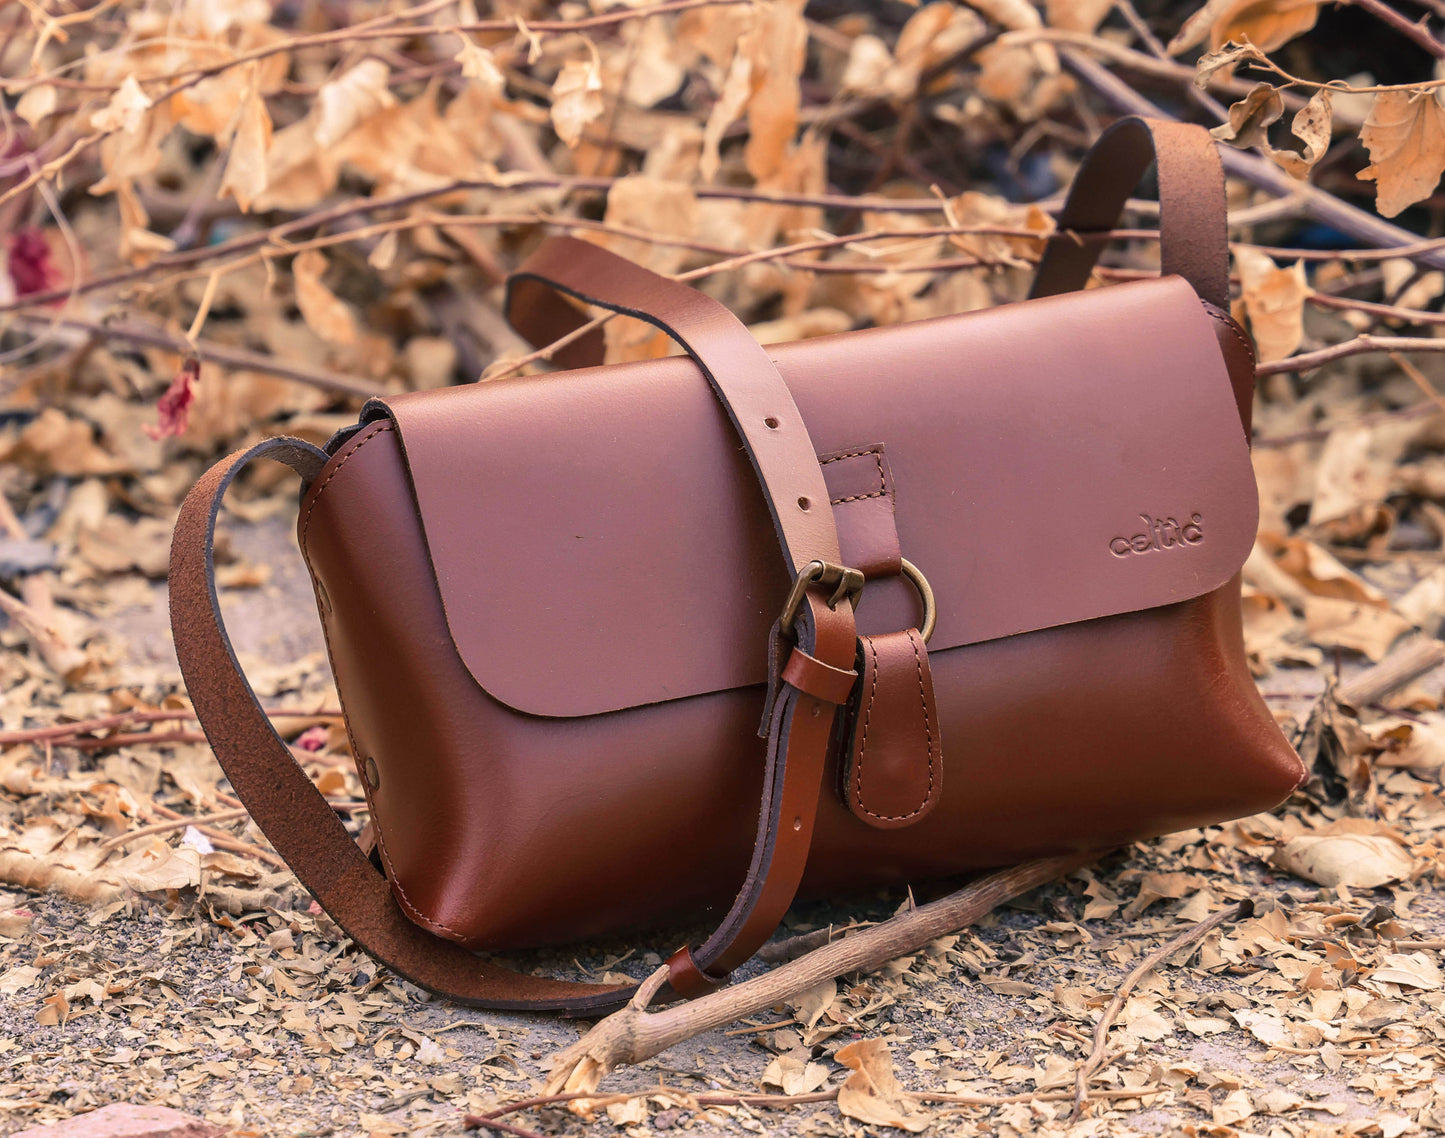 Celtic Stylish and Functional Brown Leather Cross Body Bag - Perfect for Everyday Use. - CELTICINDIA